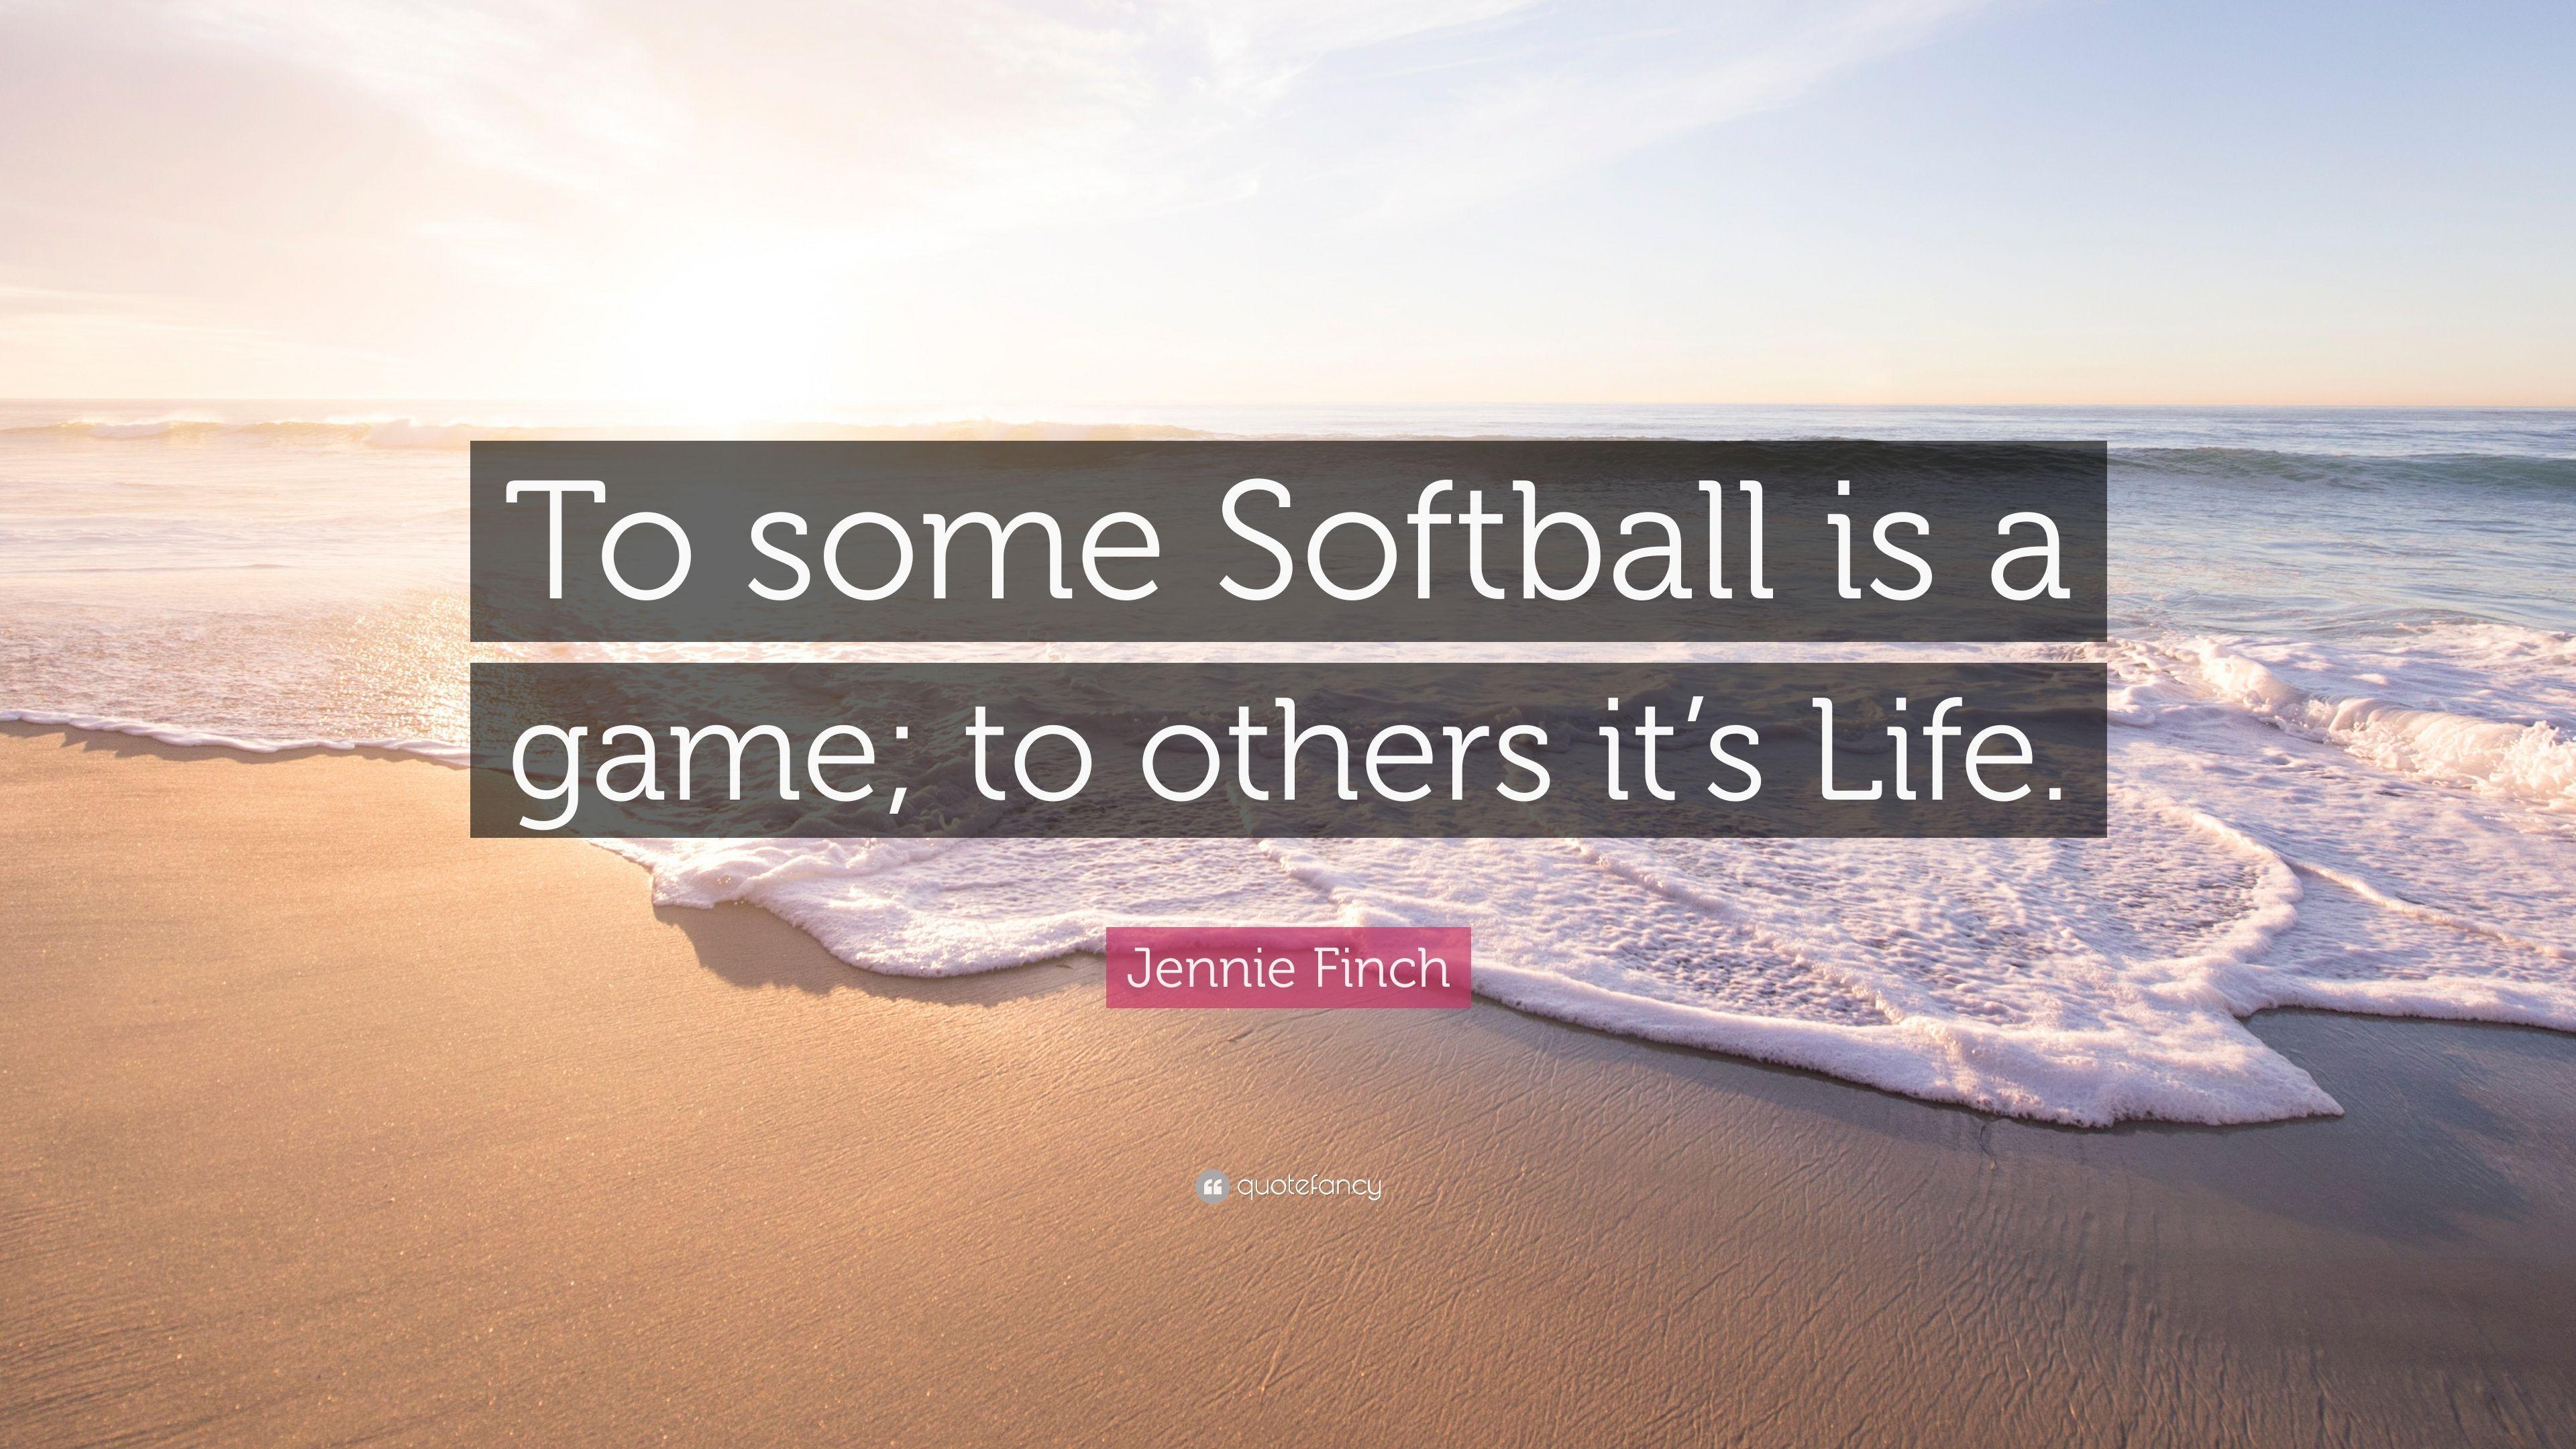 Jennie Finch Quote: “To some Softball is a game; to others it's